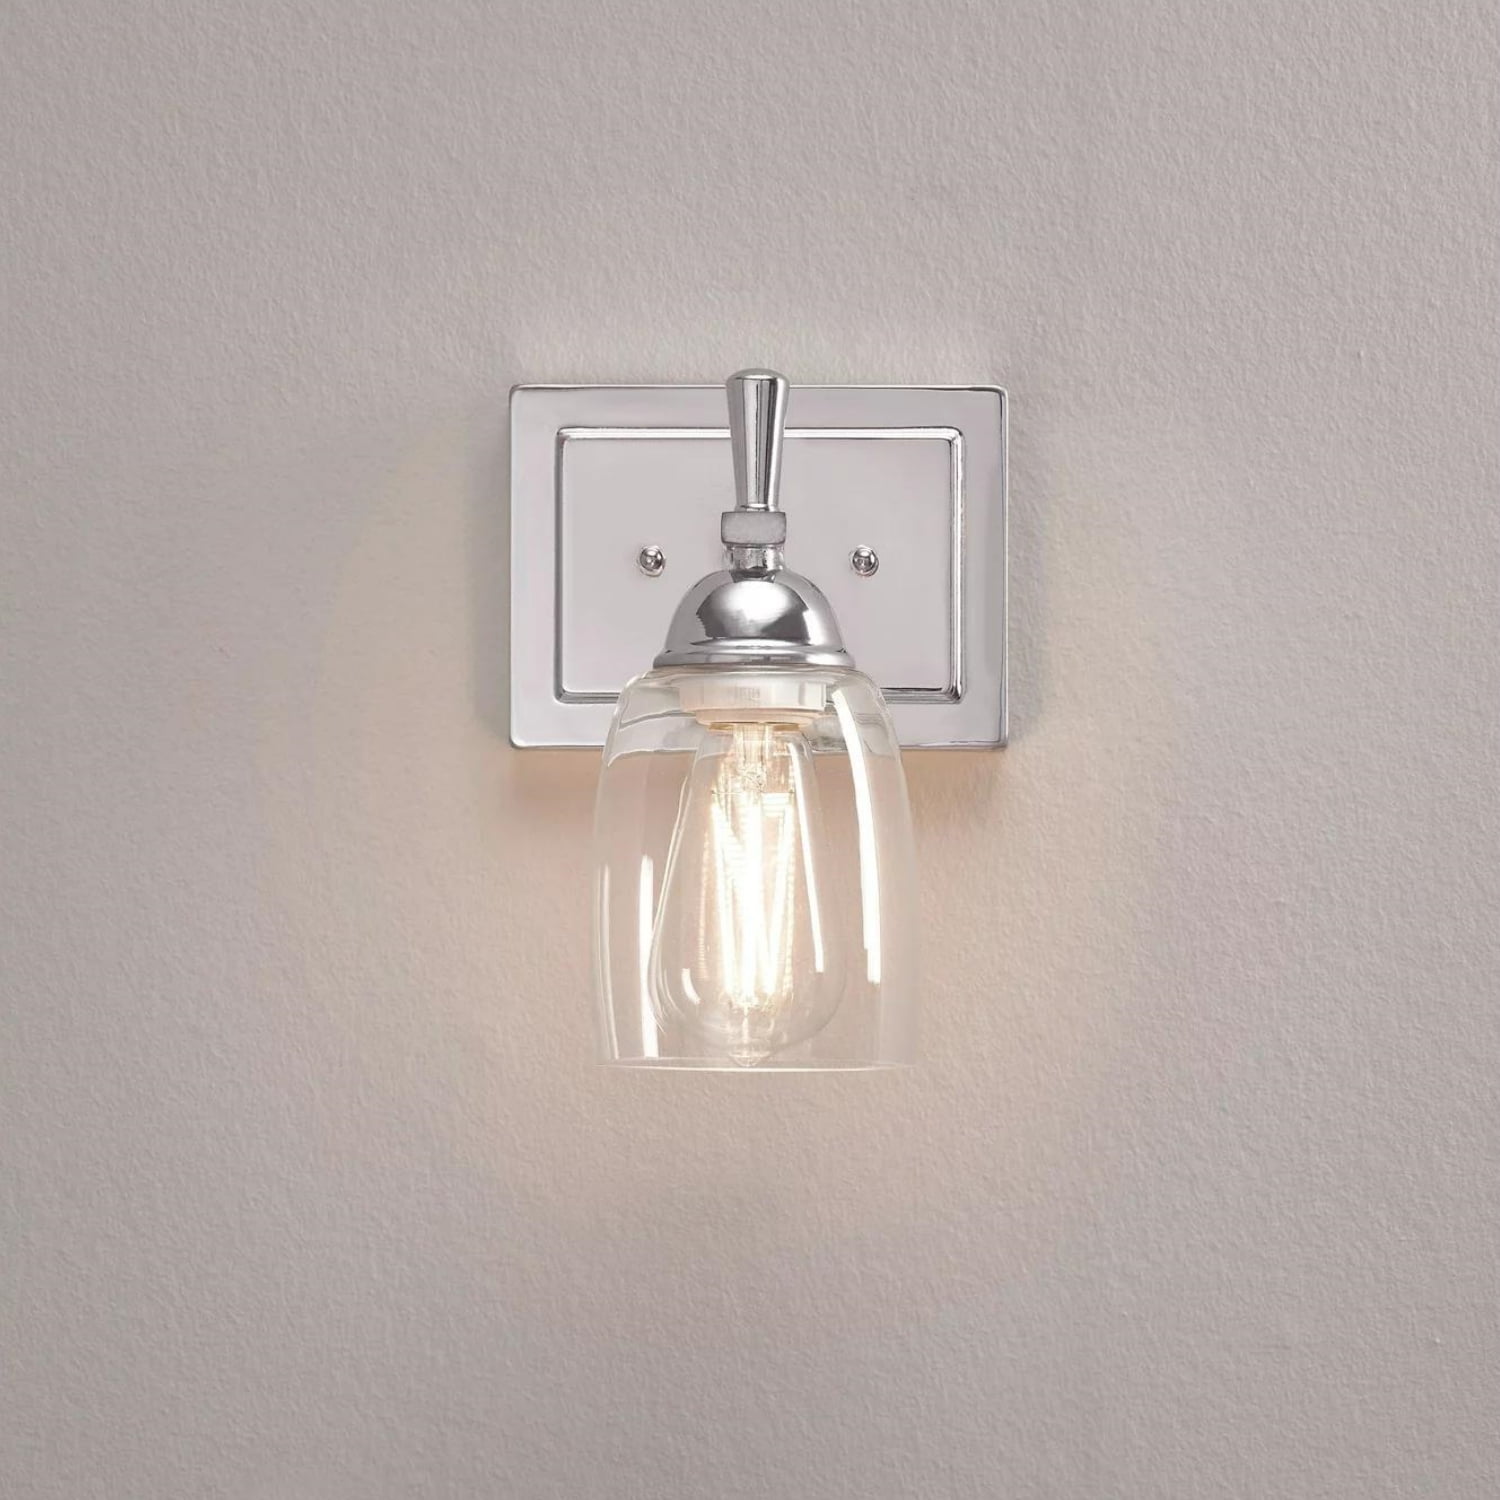 Better Homes & Gardens BH&G Modern LED Clear Glass Wall Sconce Light (Chandelier Chrome Finish ST18 with Bulb, Satin Nickle) $8.10  + Free S&H w/ Walmart+ or $35+